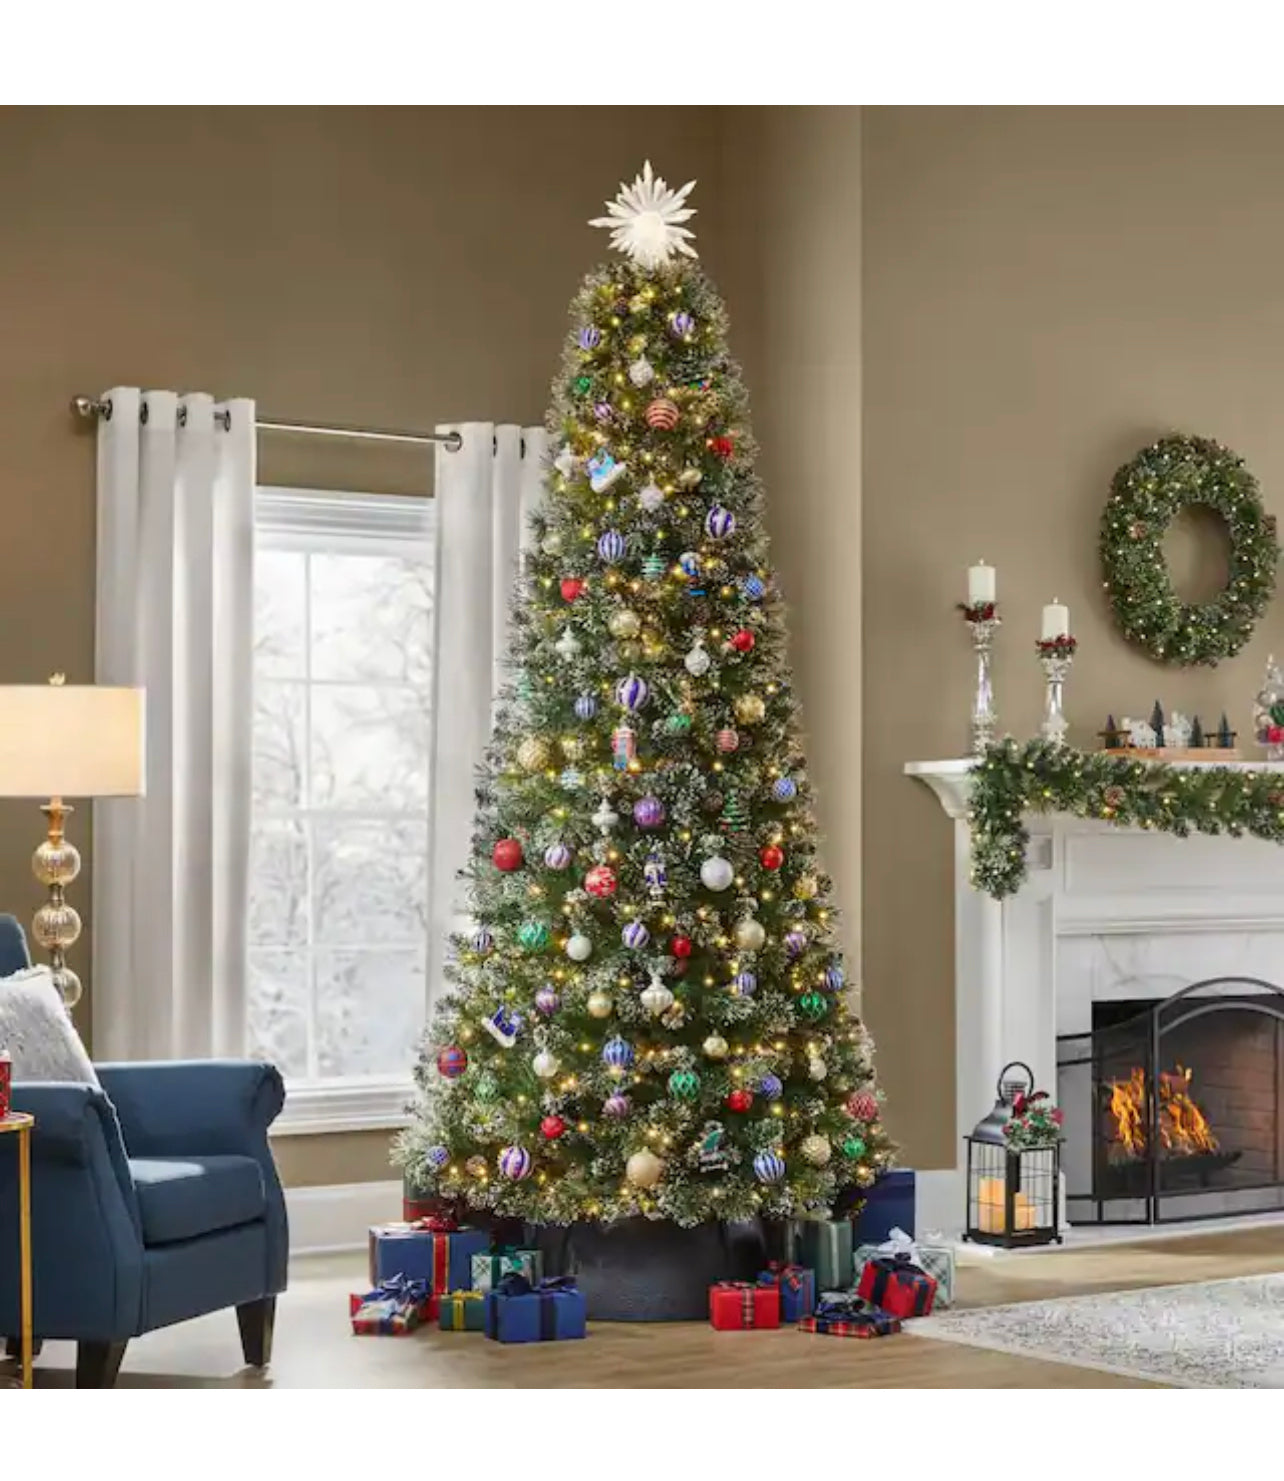 Home Accents Holiday 9 Foot Sparkling Amelia Pine LED Pre-Lit Tree Ope ...